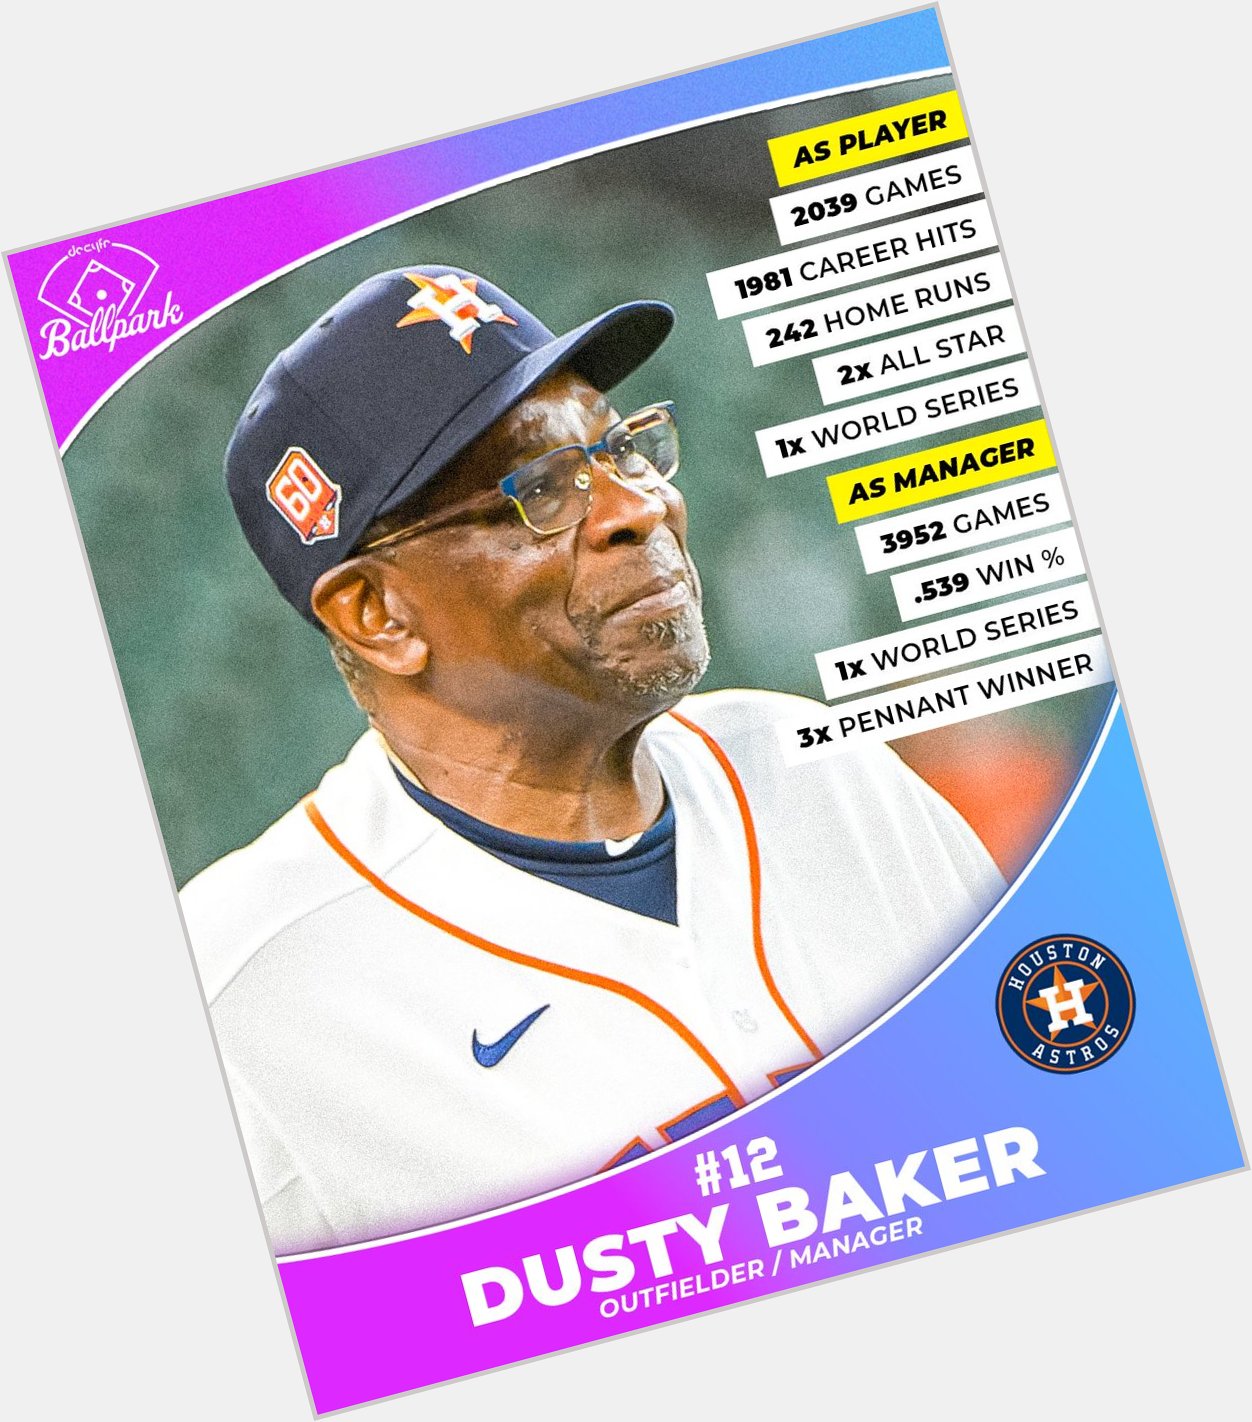 Wishing a happy birthday to baseball stalwart and manager, Dusty Baker!    